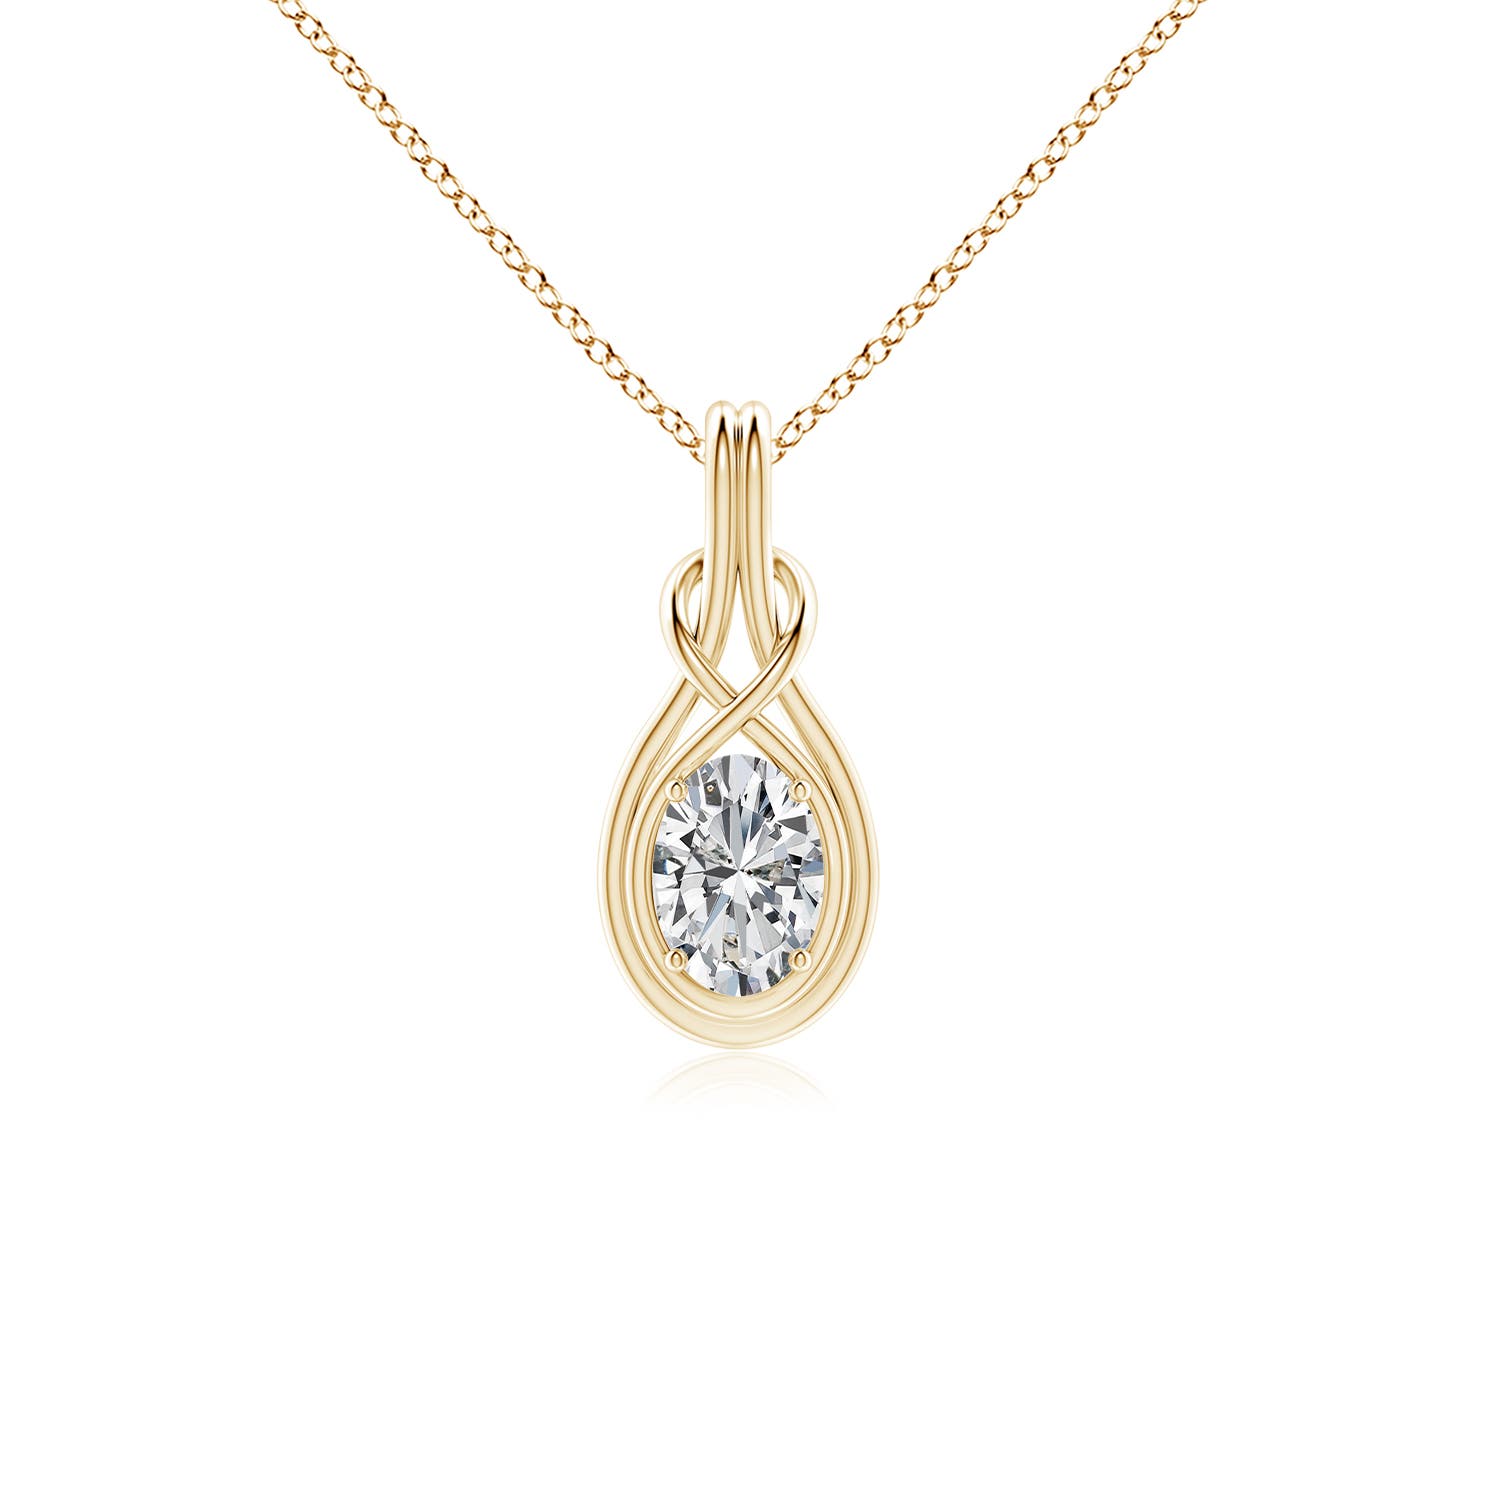 H, SI2 / 0.76 CT / 18 KT Yellow Gold